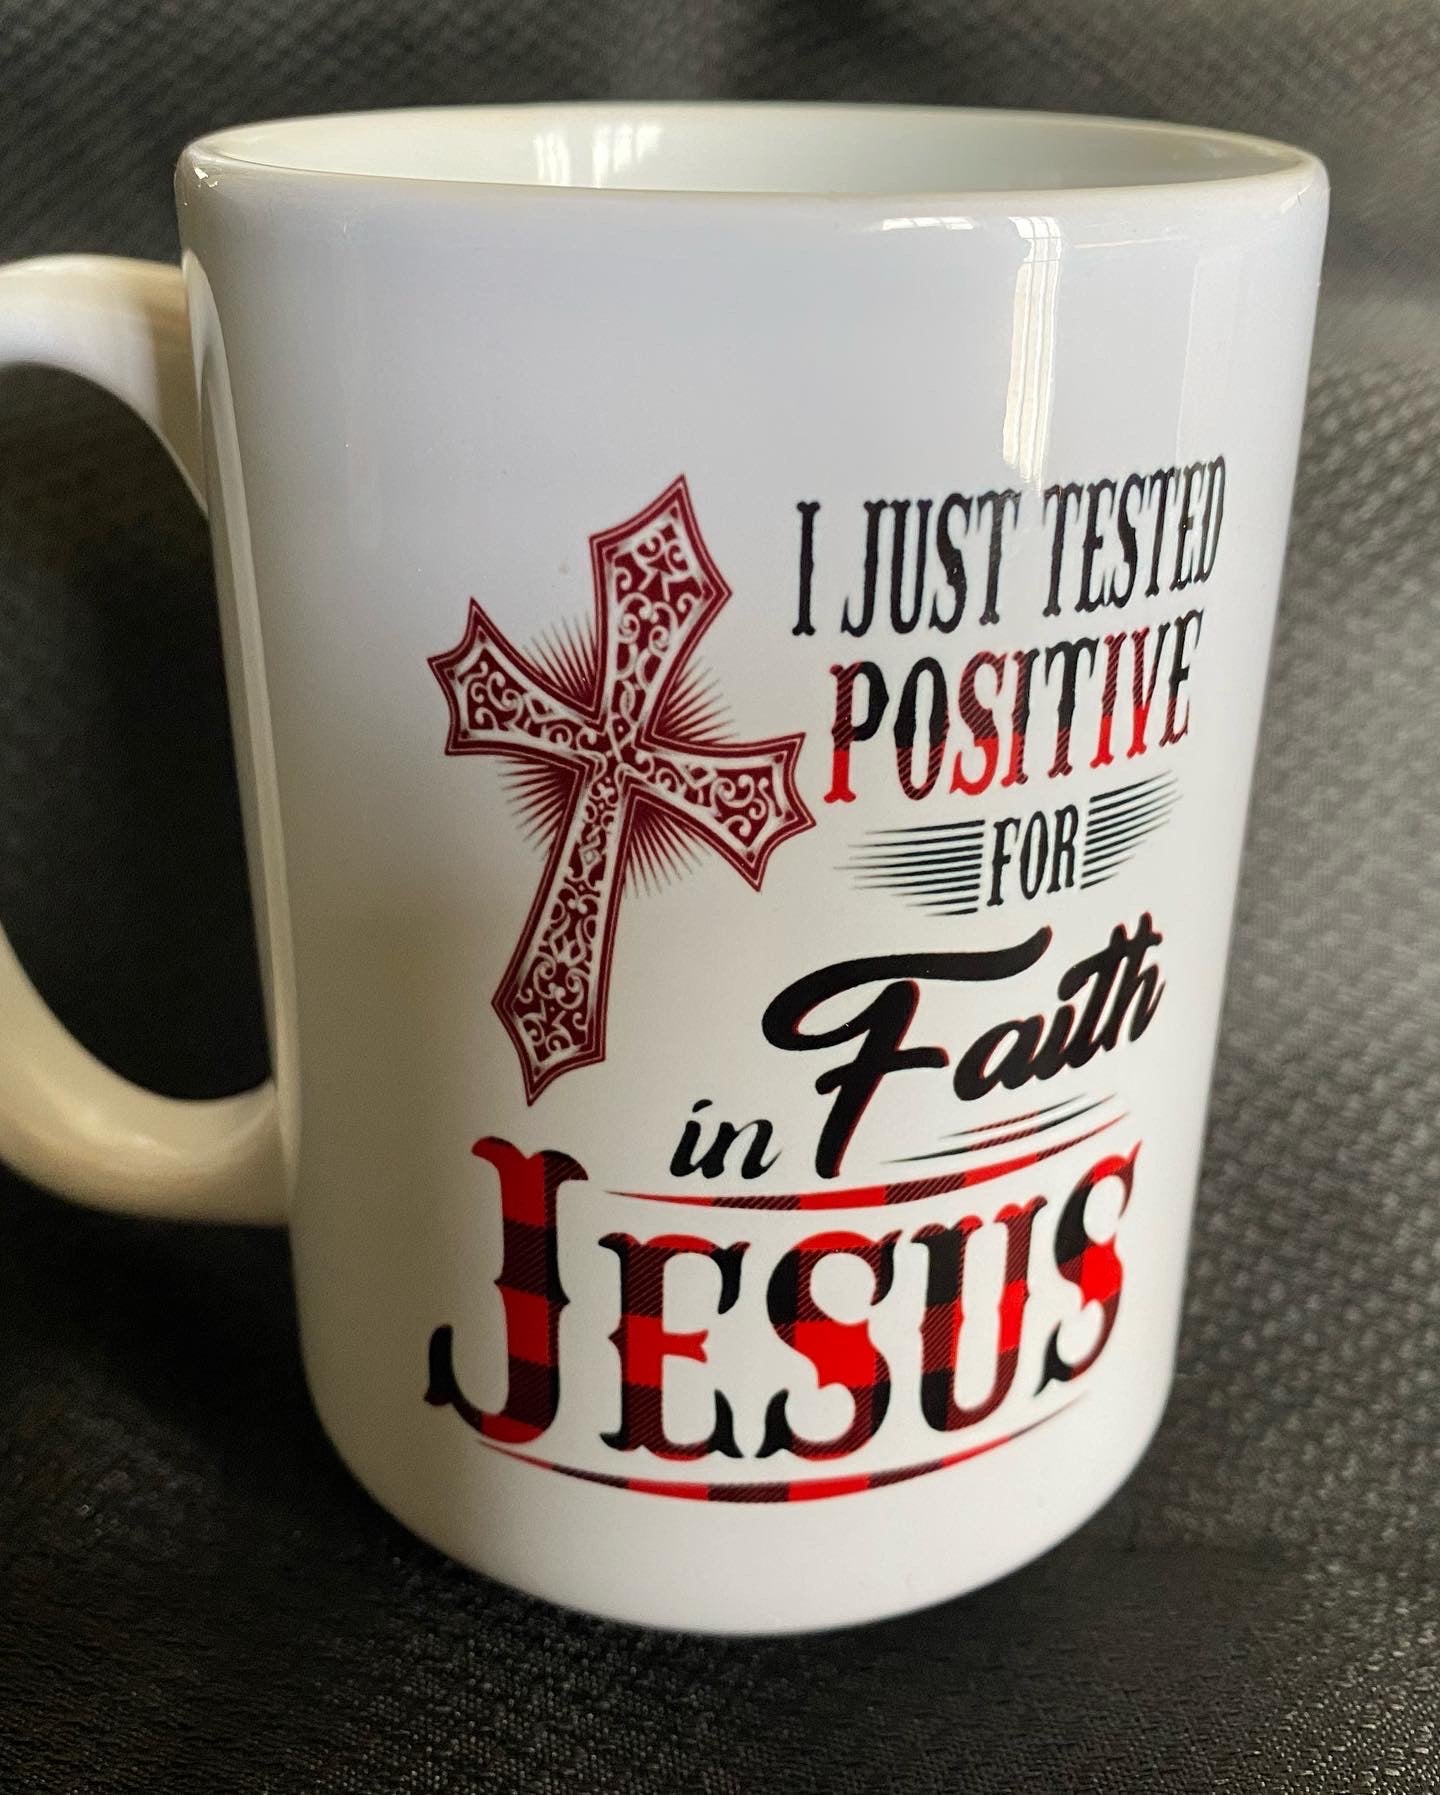 I just tested positive for faith in JESUS- Mother's Day MUG